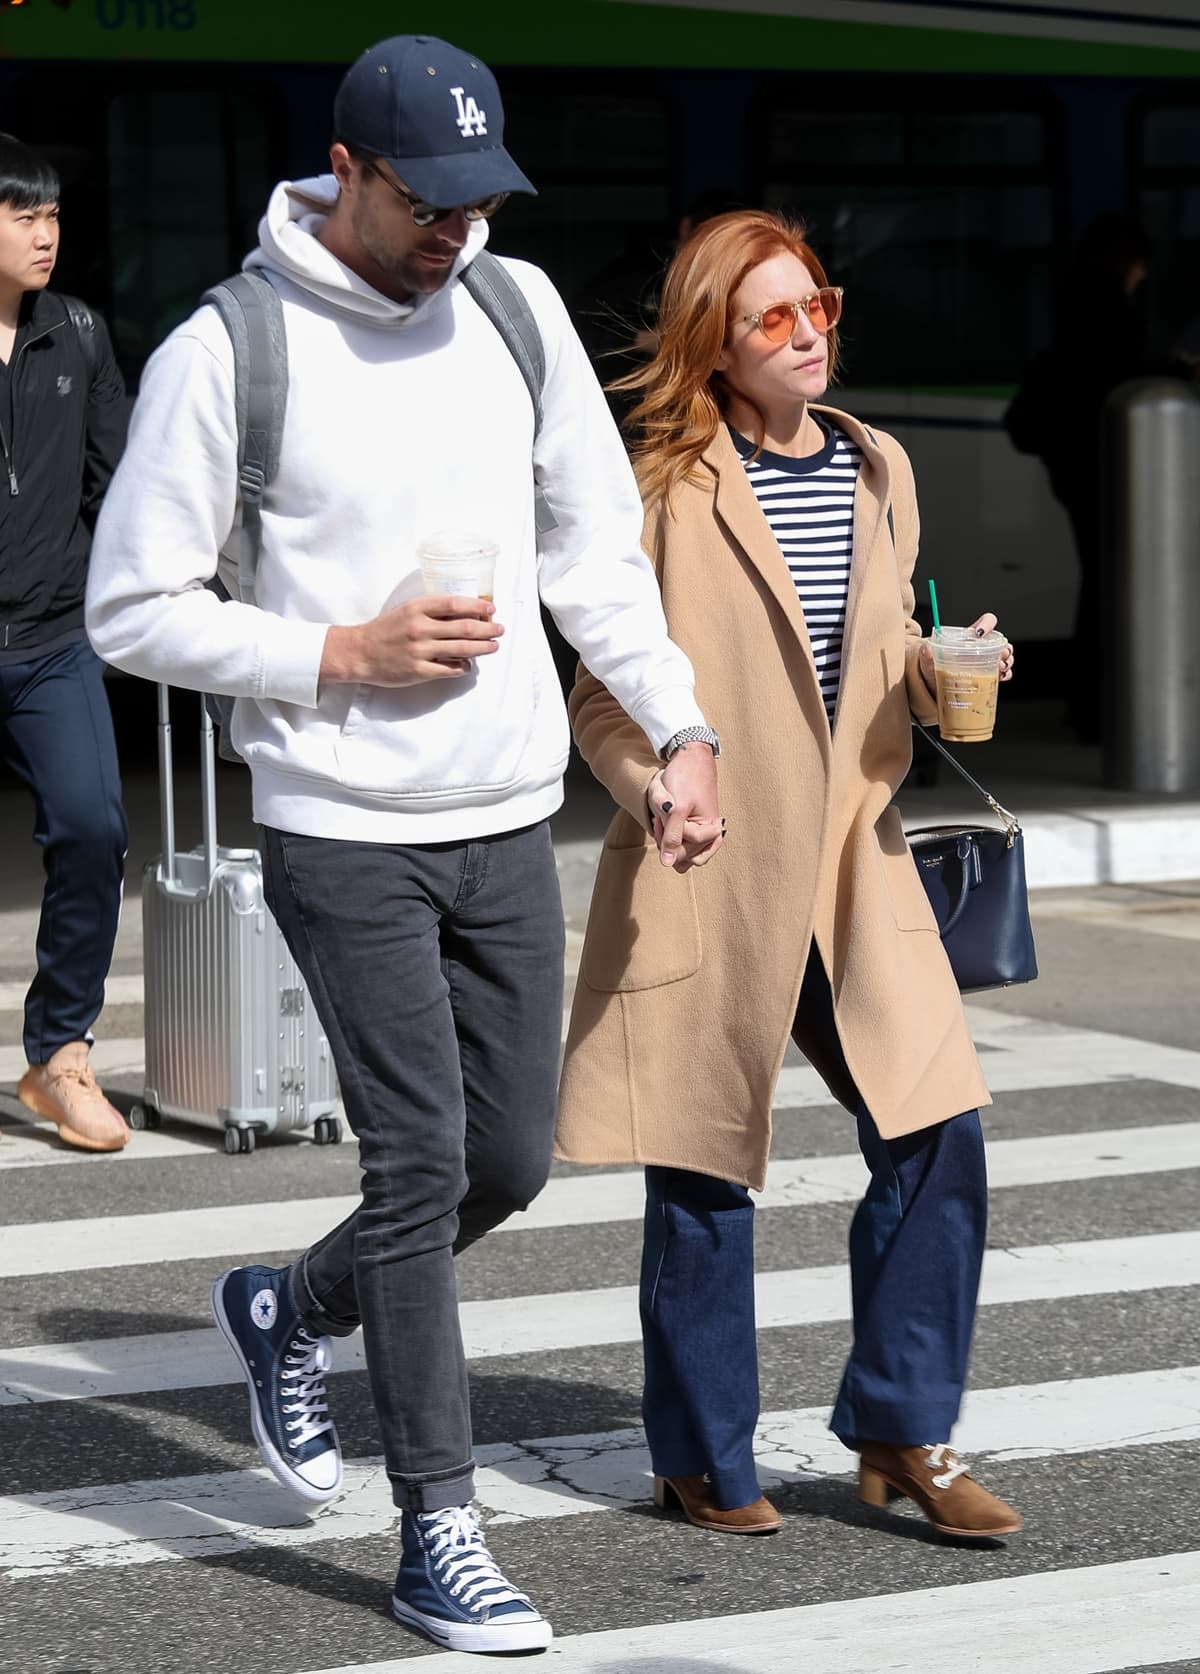 Brittany Snow and her fiancé Tyler Stanaland are seen at Los Angeles International Airport (LAX)